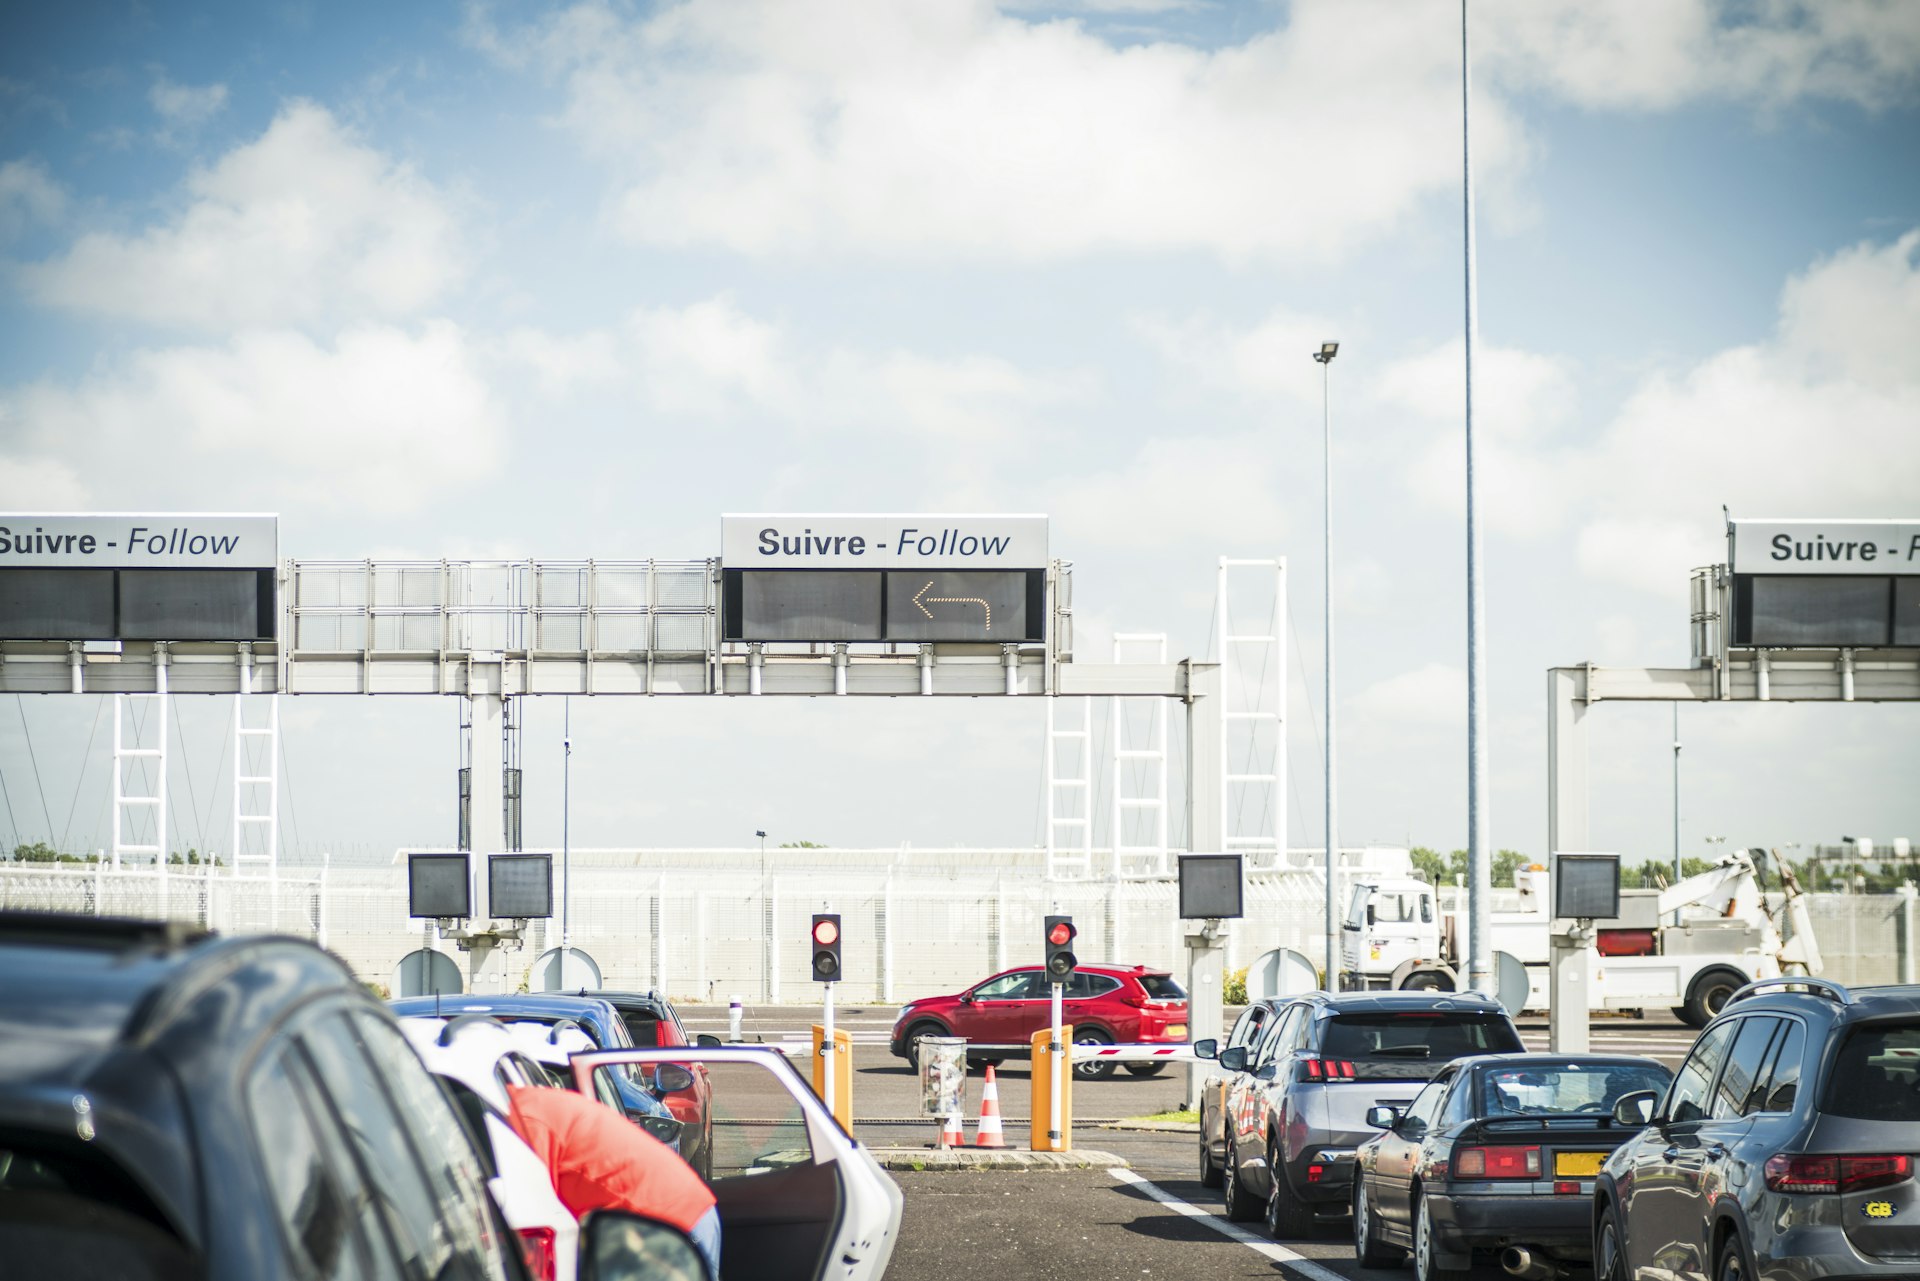 Many cars are lined up, awaiting their turn to board the Eurotunnel trains. Overhead signs direct drivers in French and English.